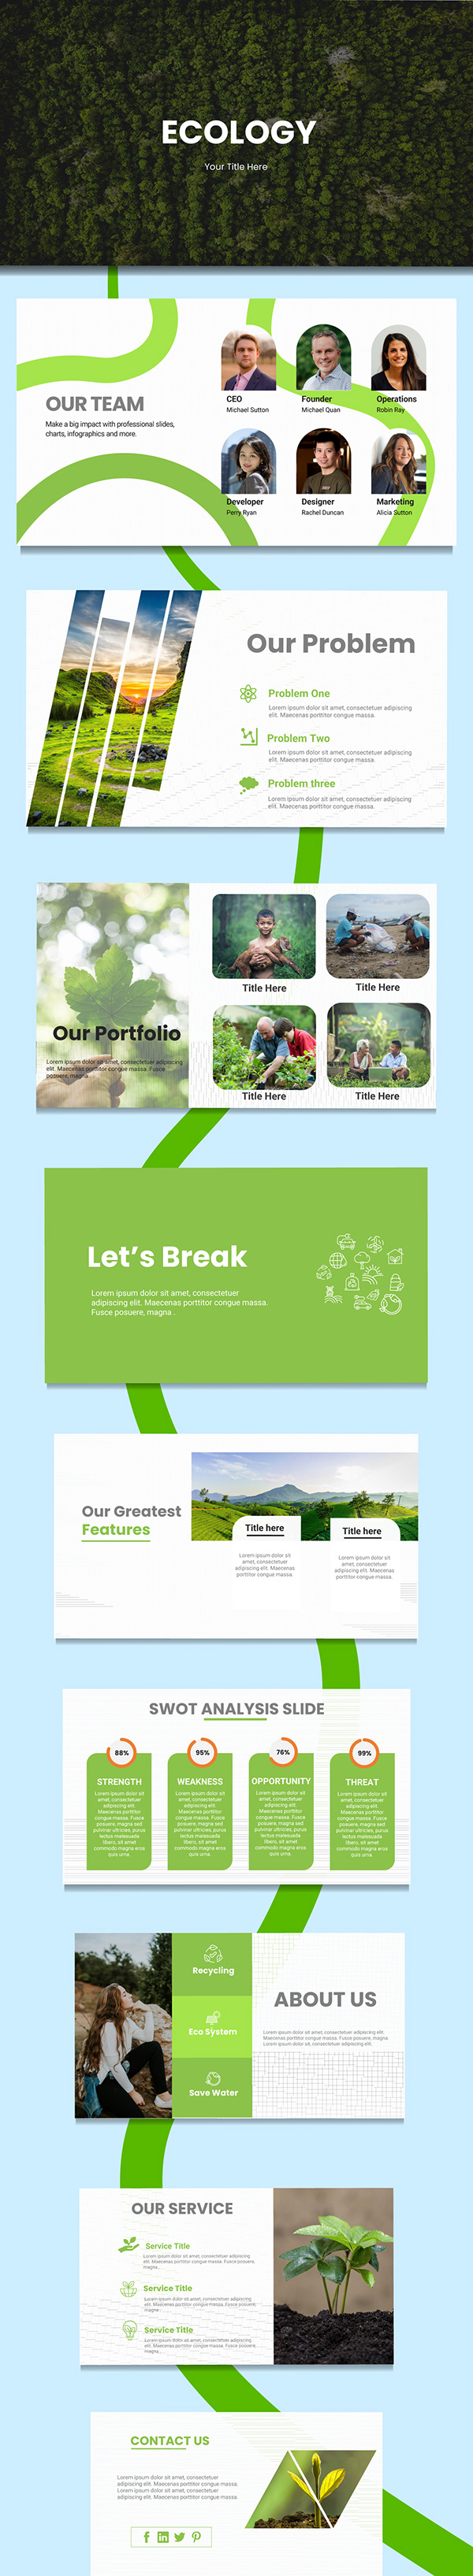 Ecology PowerPoint Presentation Template